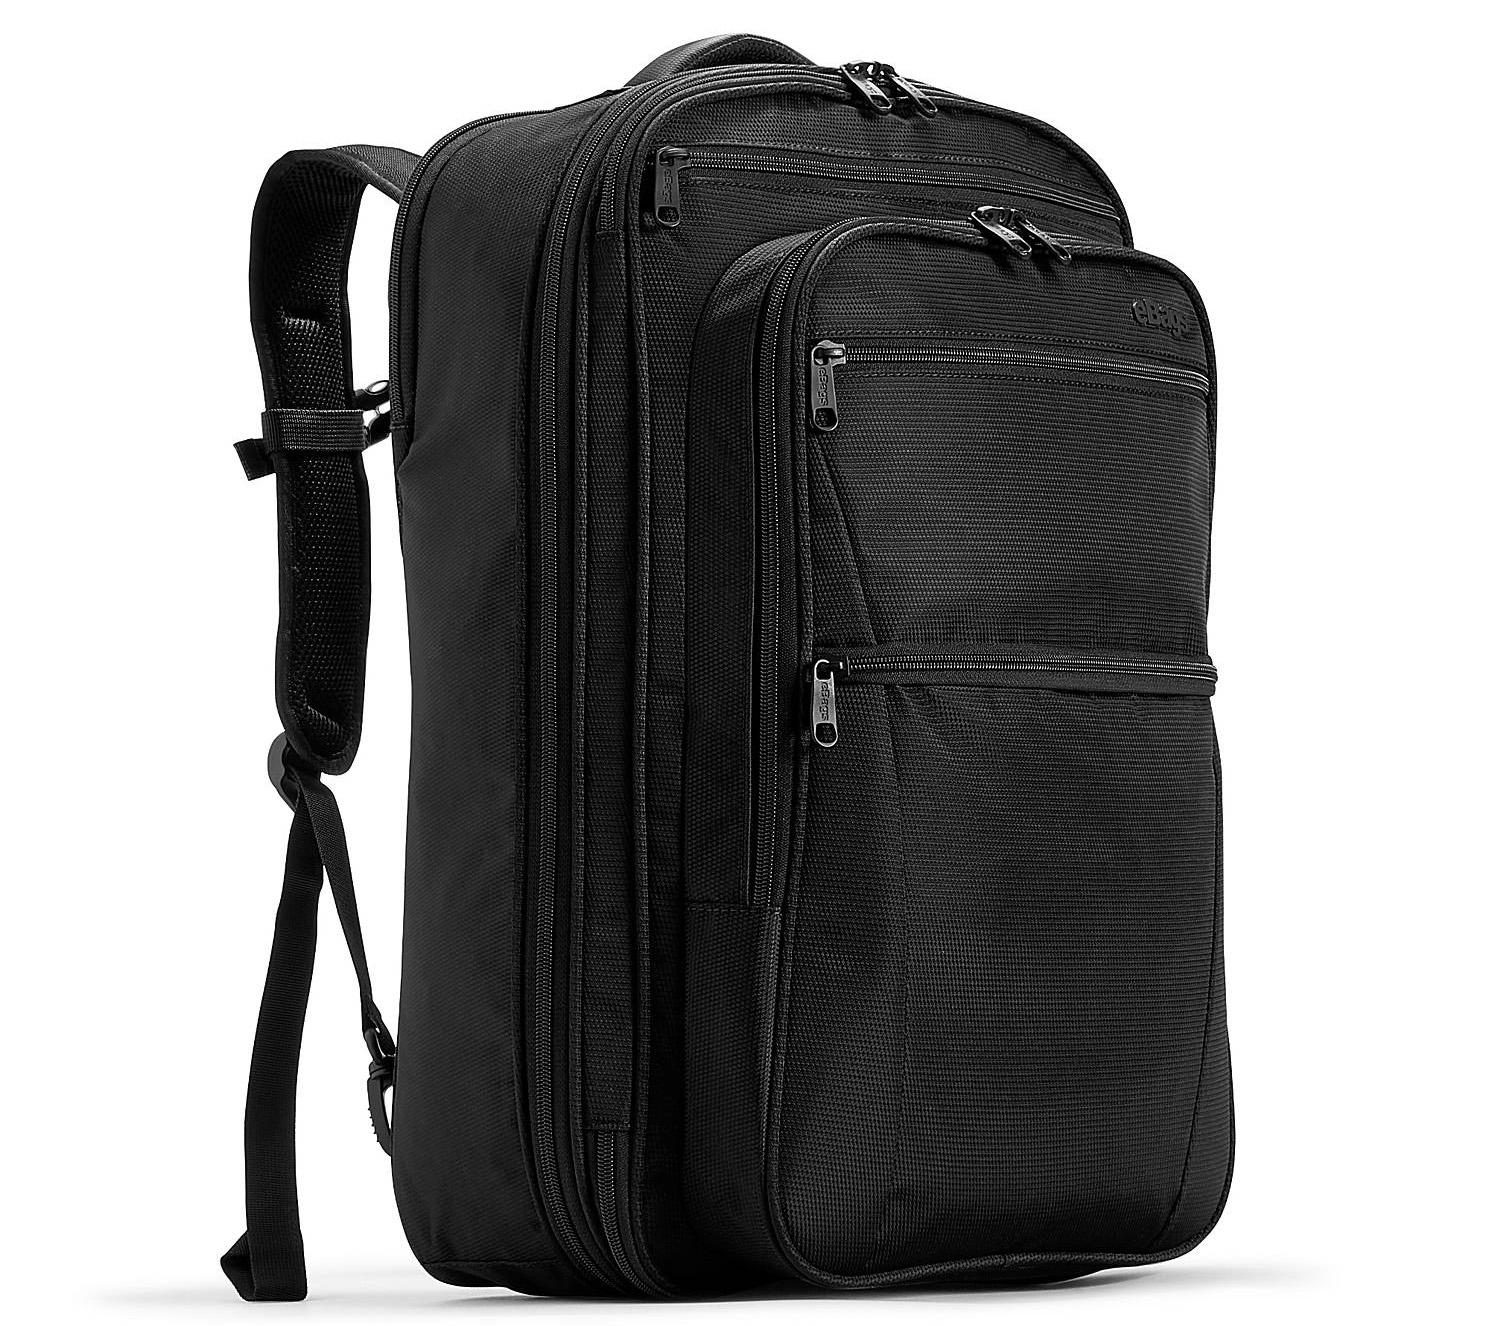 eBags 21in EXO Travel Backpack for $27.49 Shipped